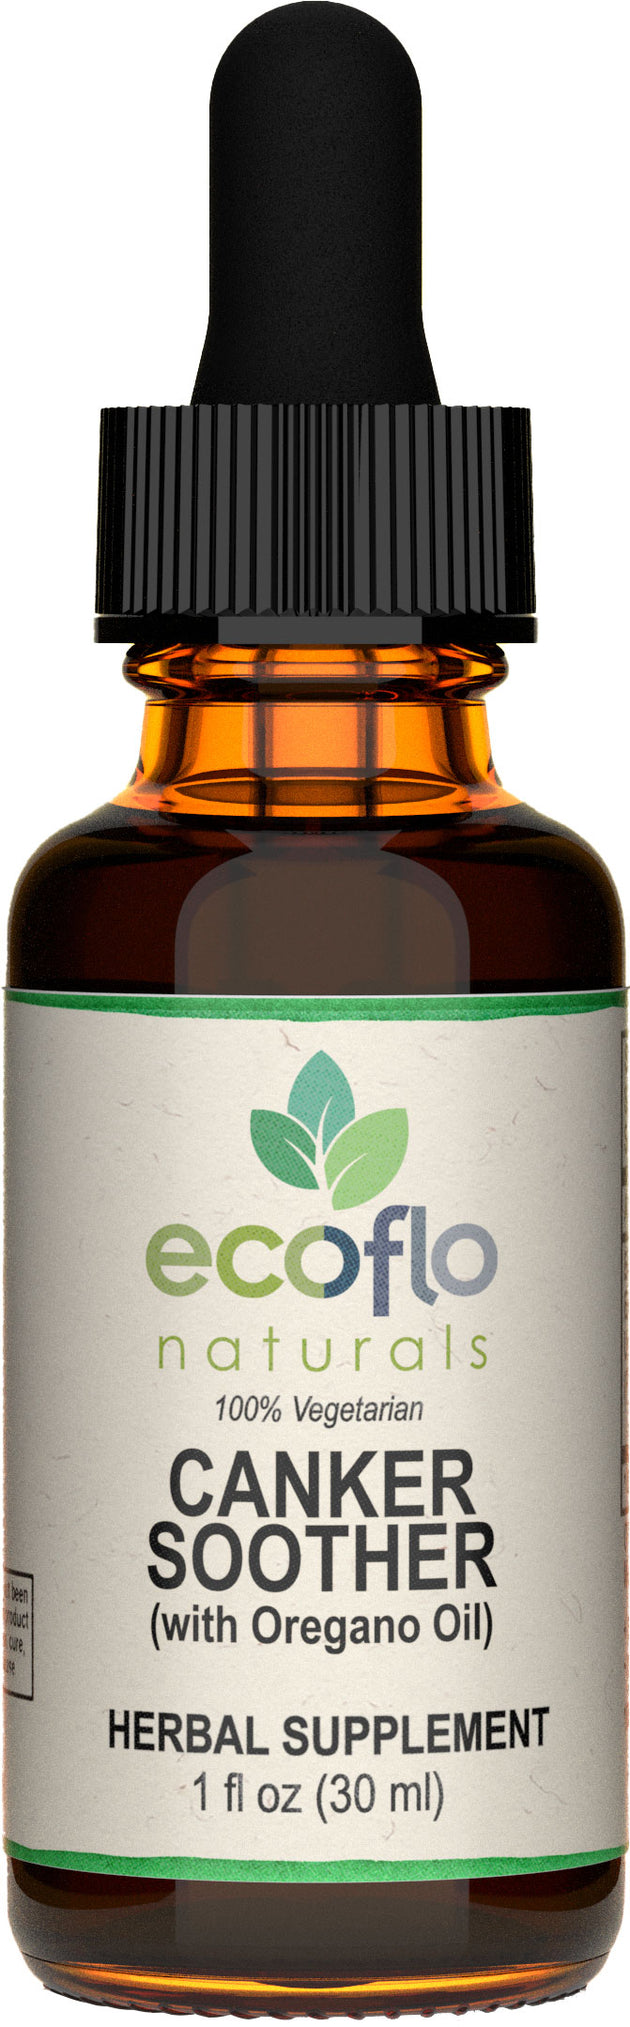 Canker Soother (with Oregano Oil), 1 Fl Oz (30 mL) Liquid , BOGO Mix and Match BOGO Sale